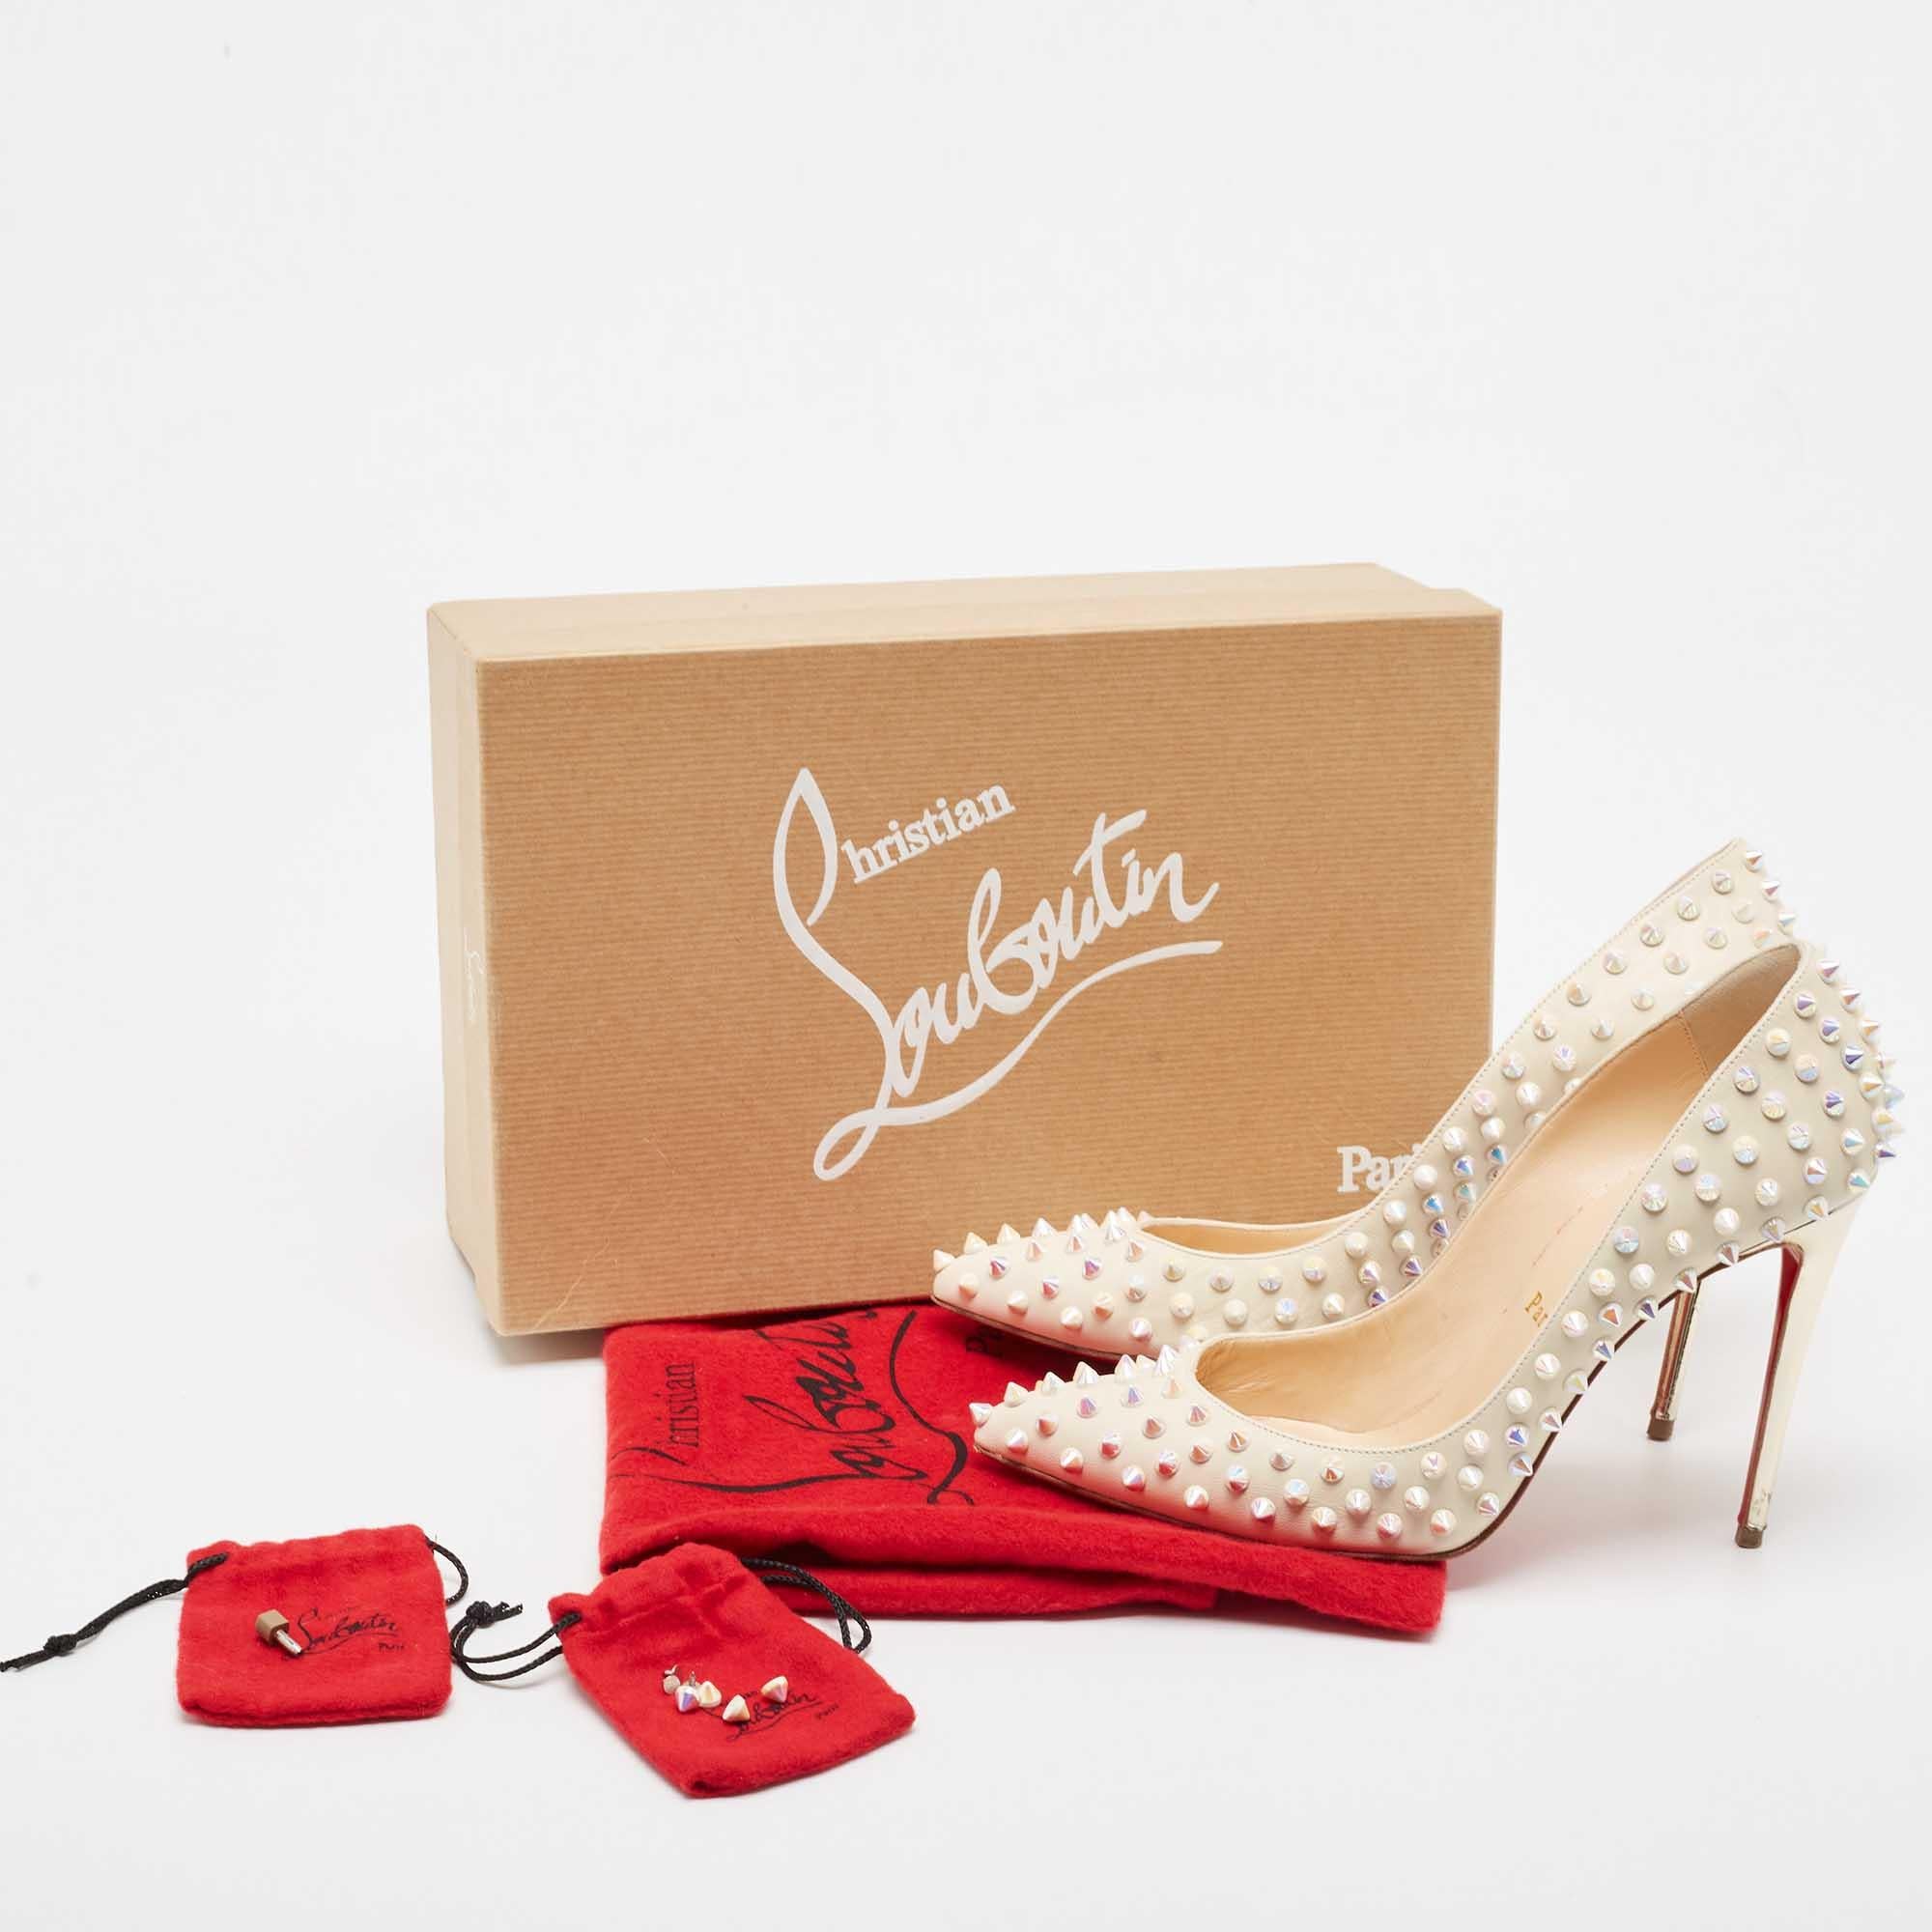 Christian Louboutin Cream Leather Follies Spikes Pointed Toe Pumps Size 38 For Sale 5